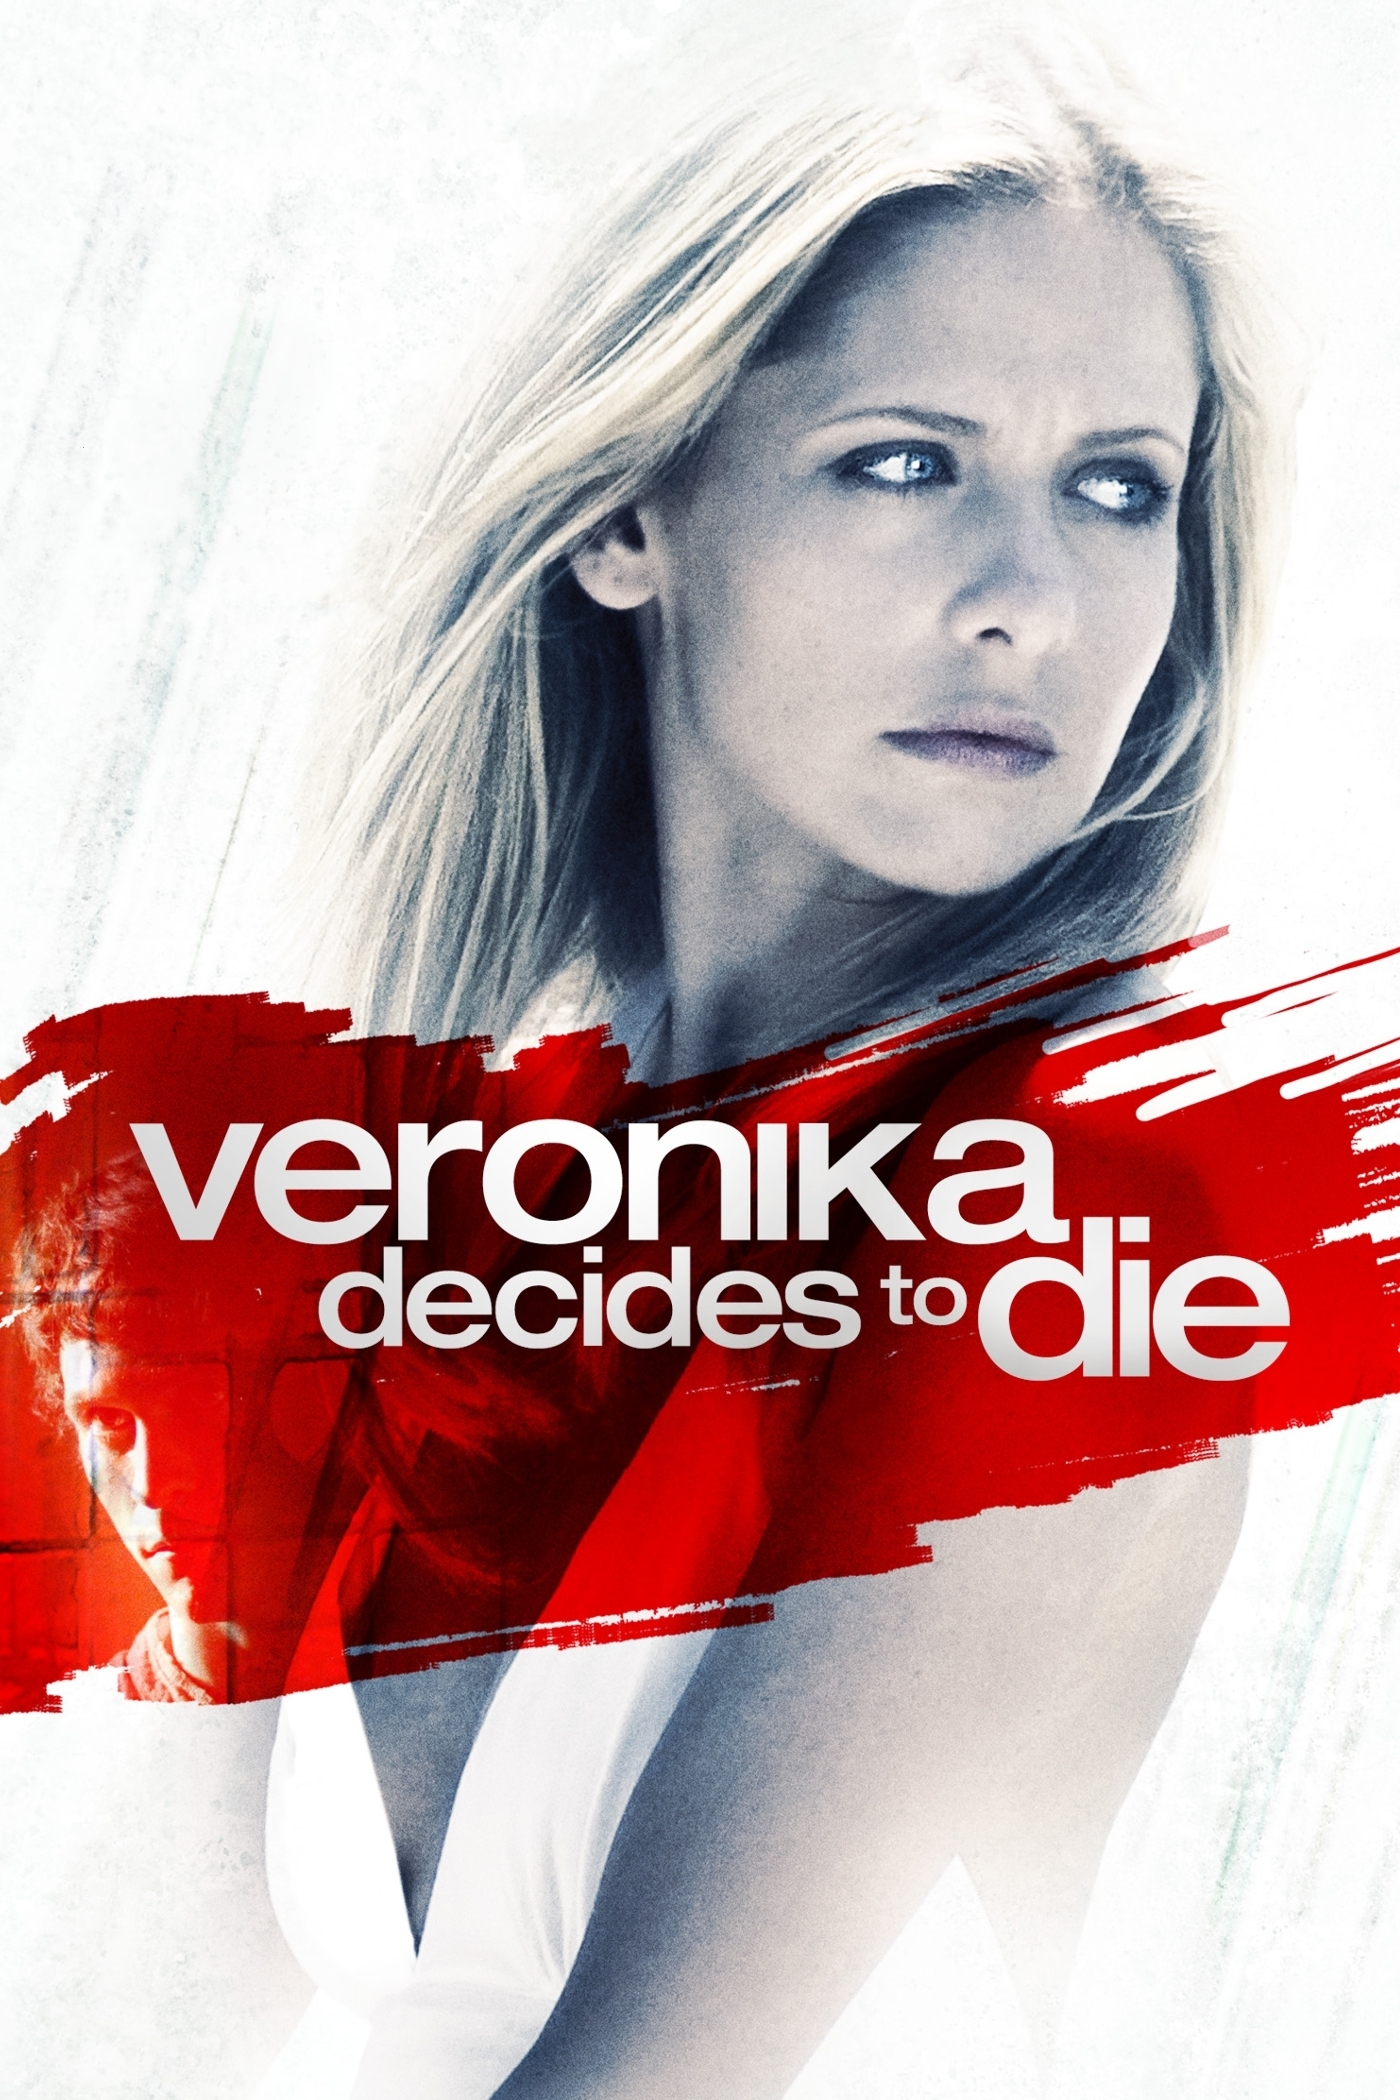 Poster for the movie "Veronika Decides to Die"